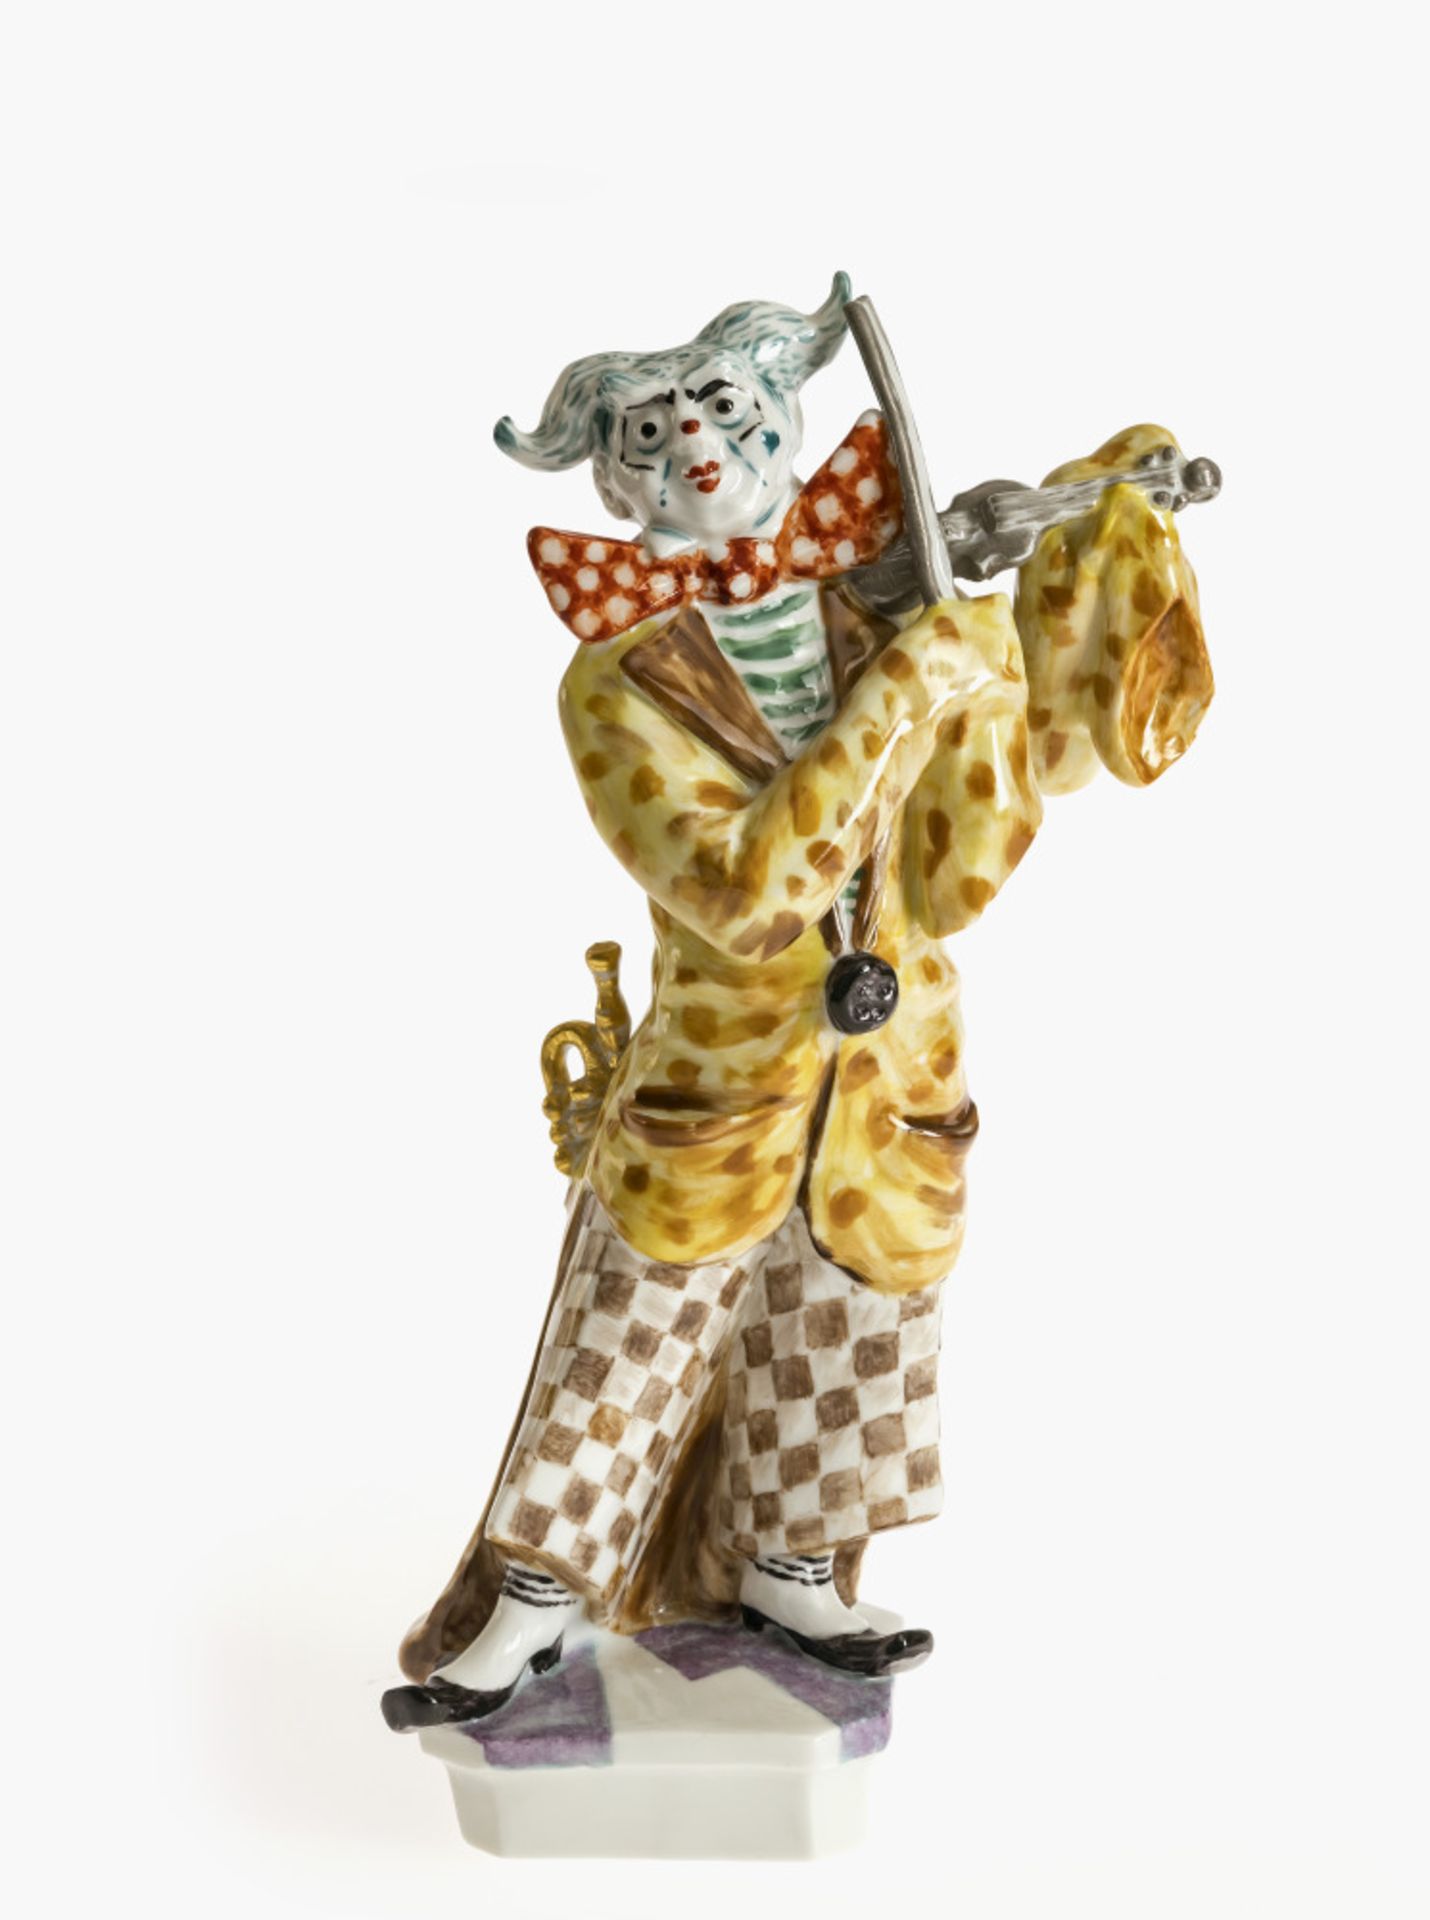 Orchestra leader (clown with violin)